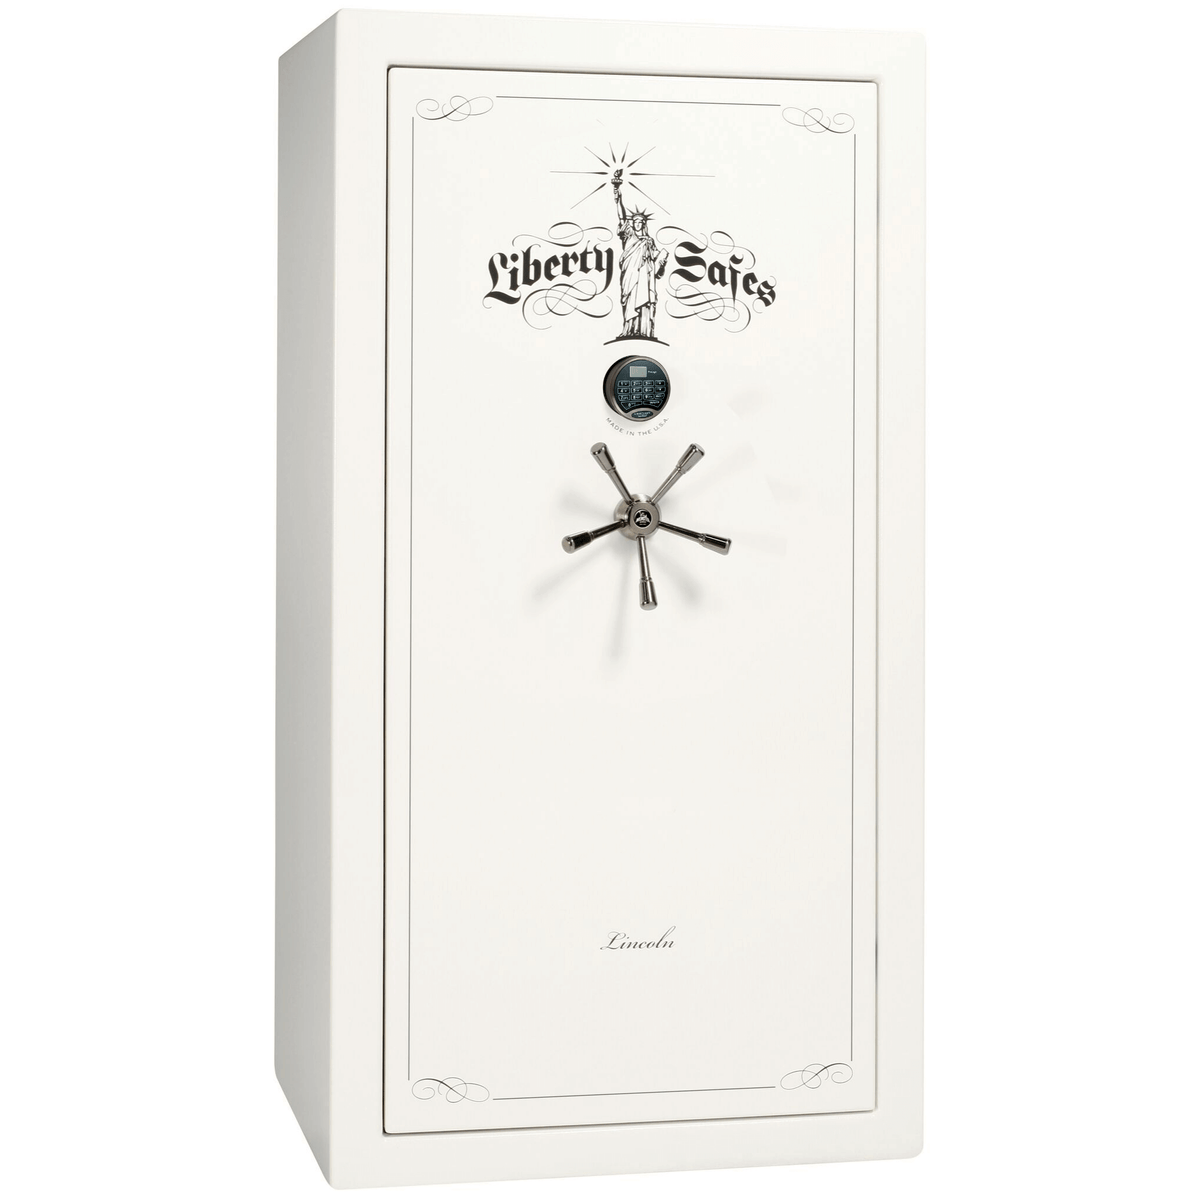 Lincoln Series | Level 7 Security | 110 Minute Fire Protection | Liberty Safe Norcal.